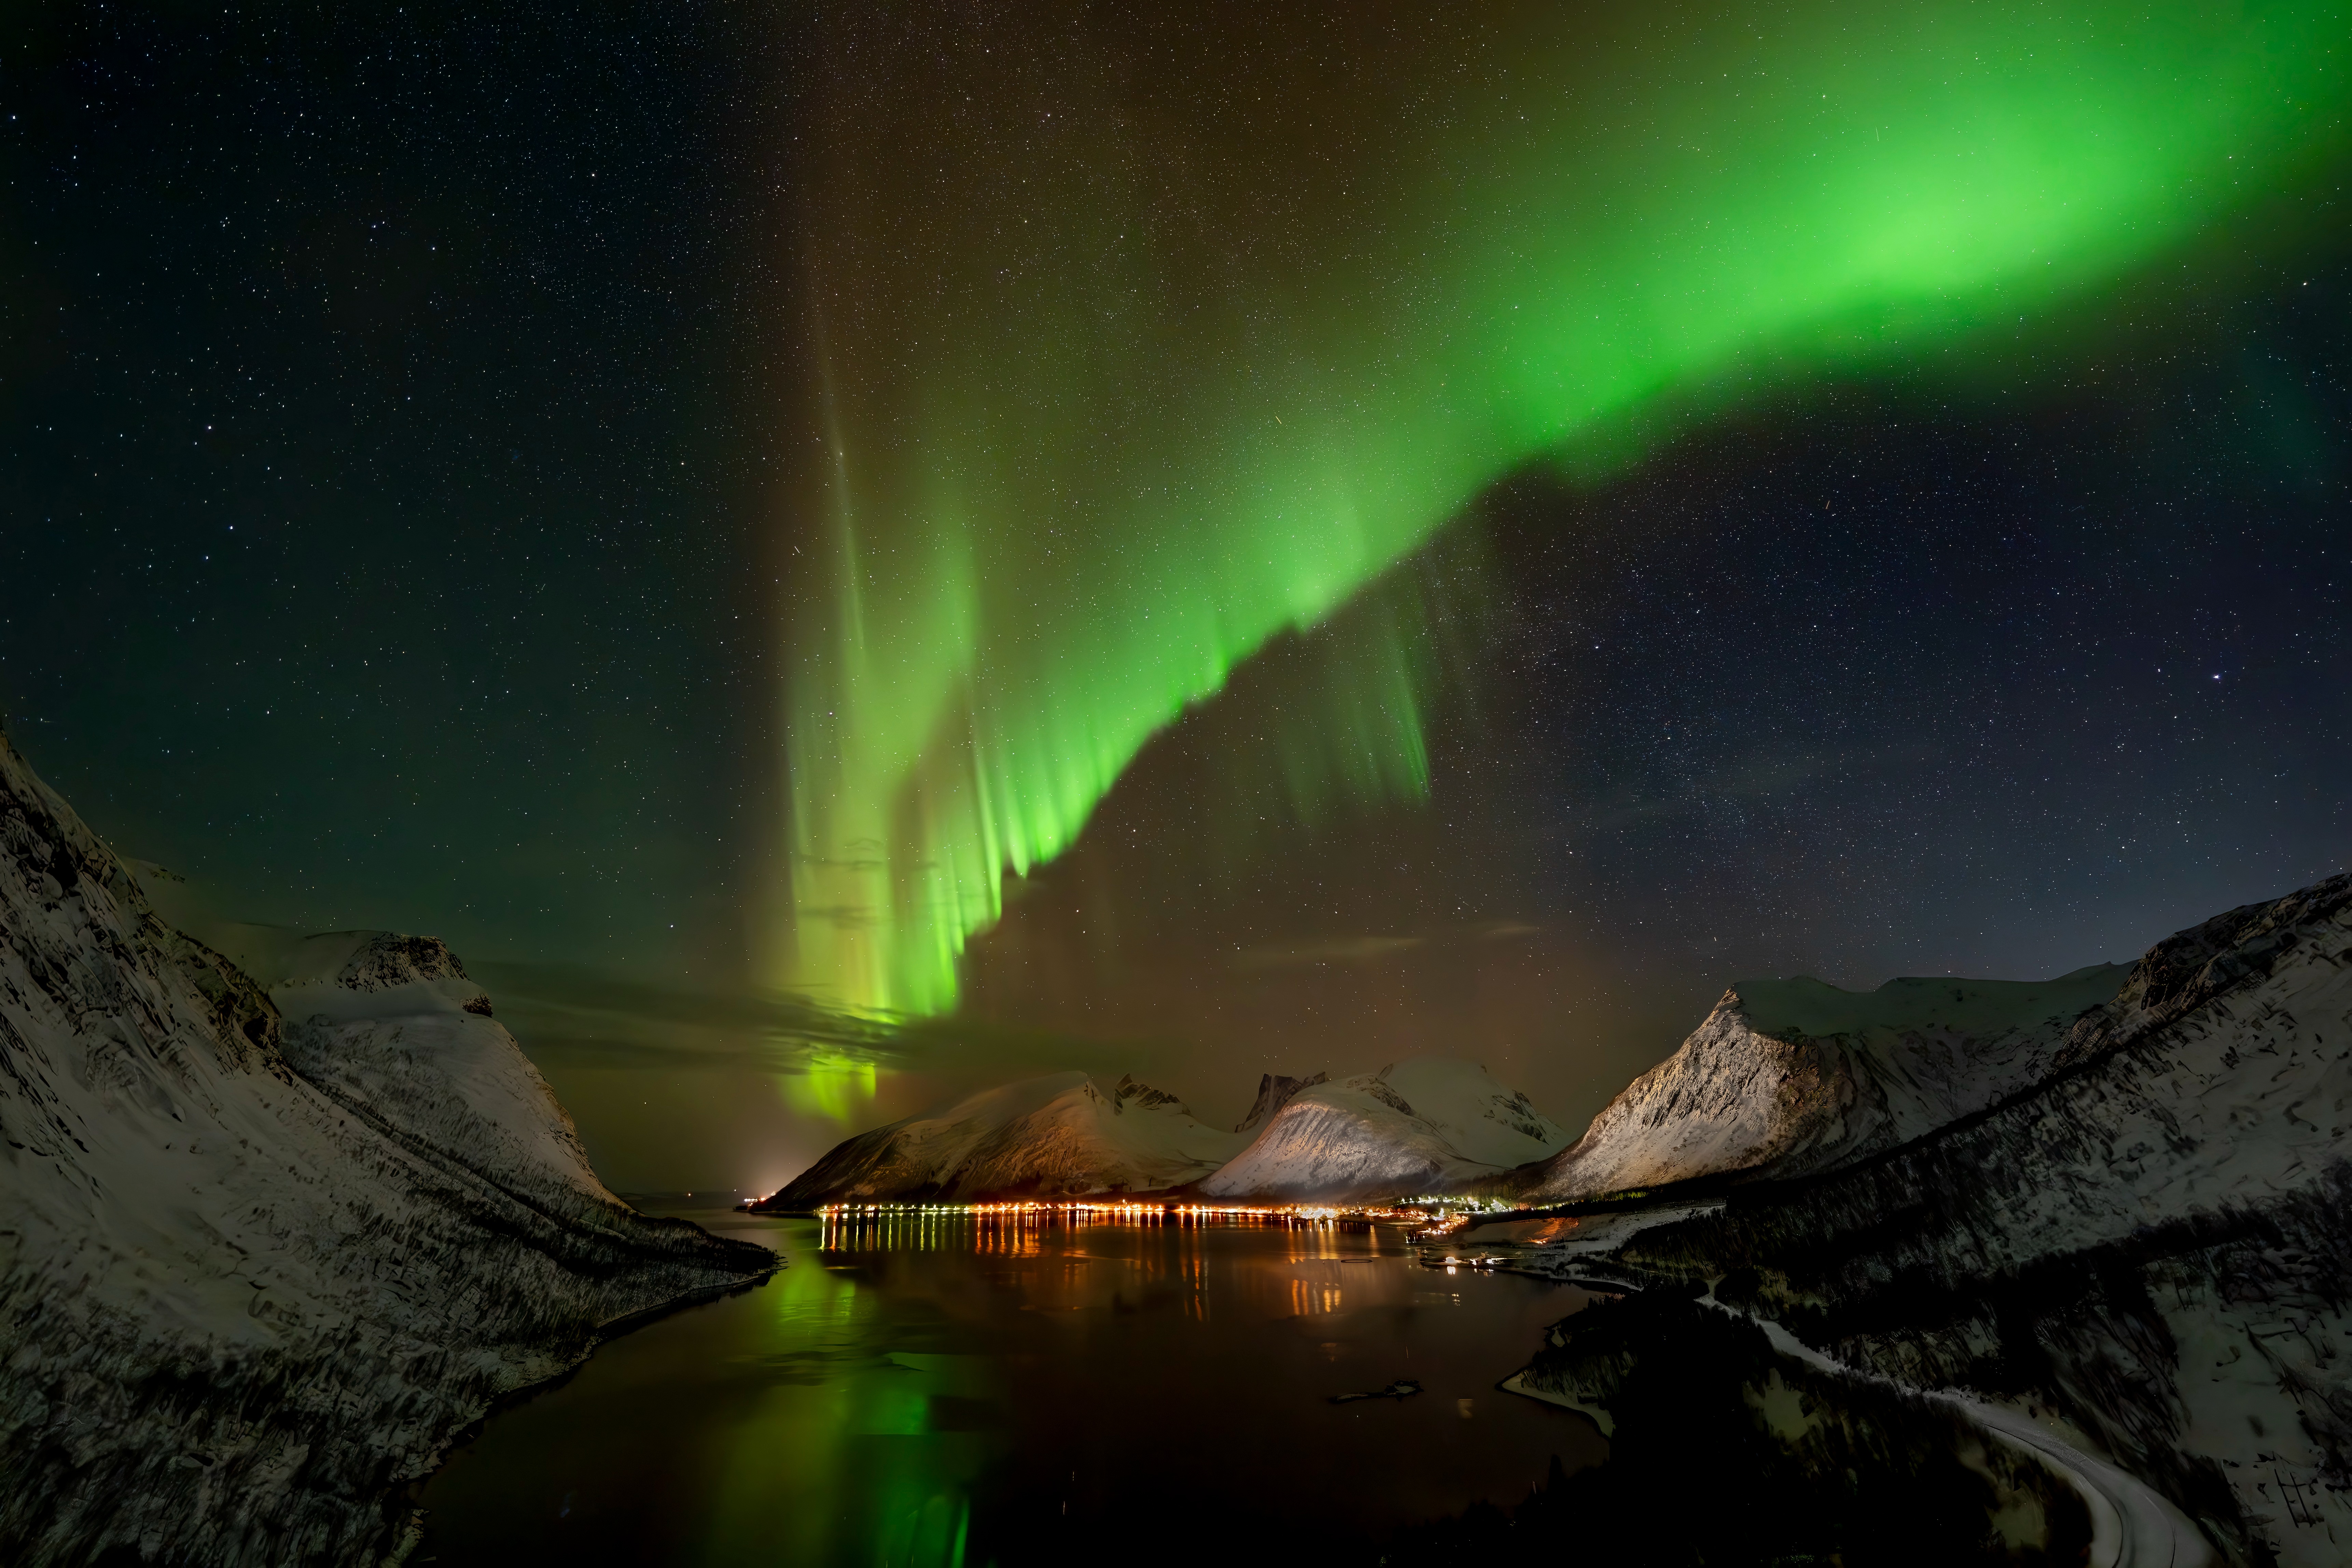 An aurora arcs over a fjord on the Norwegian island of Senja, roughly 3° north of the Arctic Circle, lighting up the villages of Bergsbotn and Indregård. Credit: Marty Weintraub.